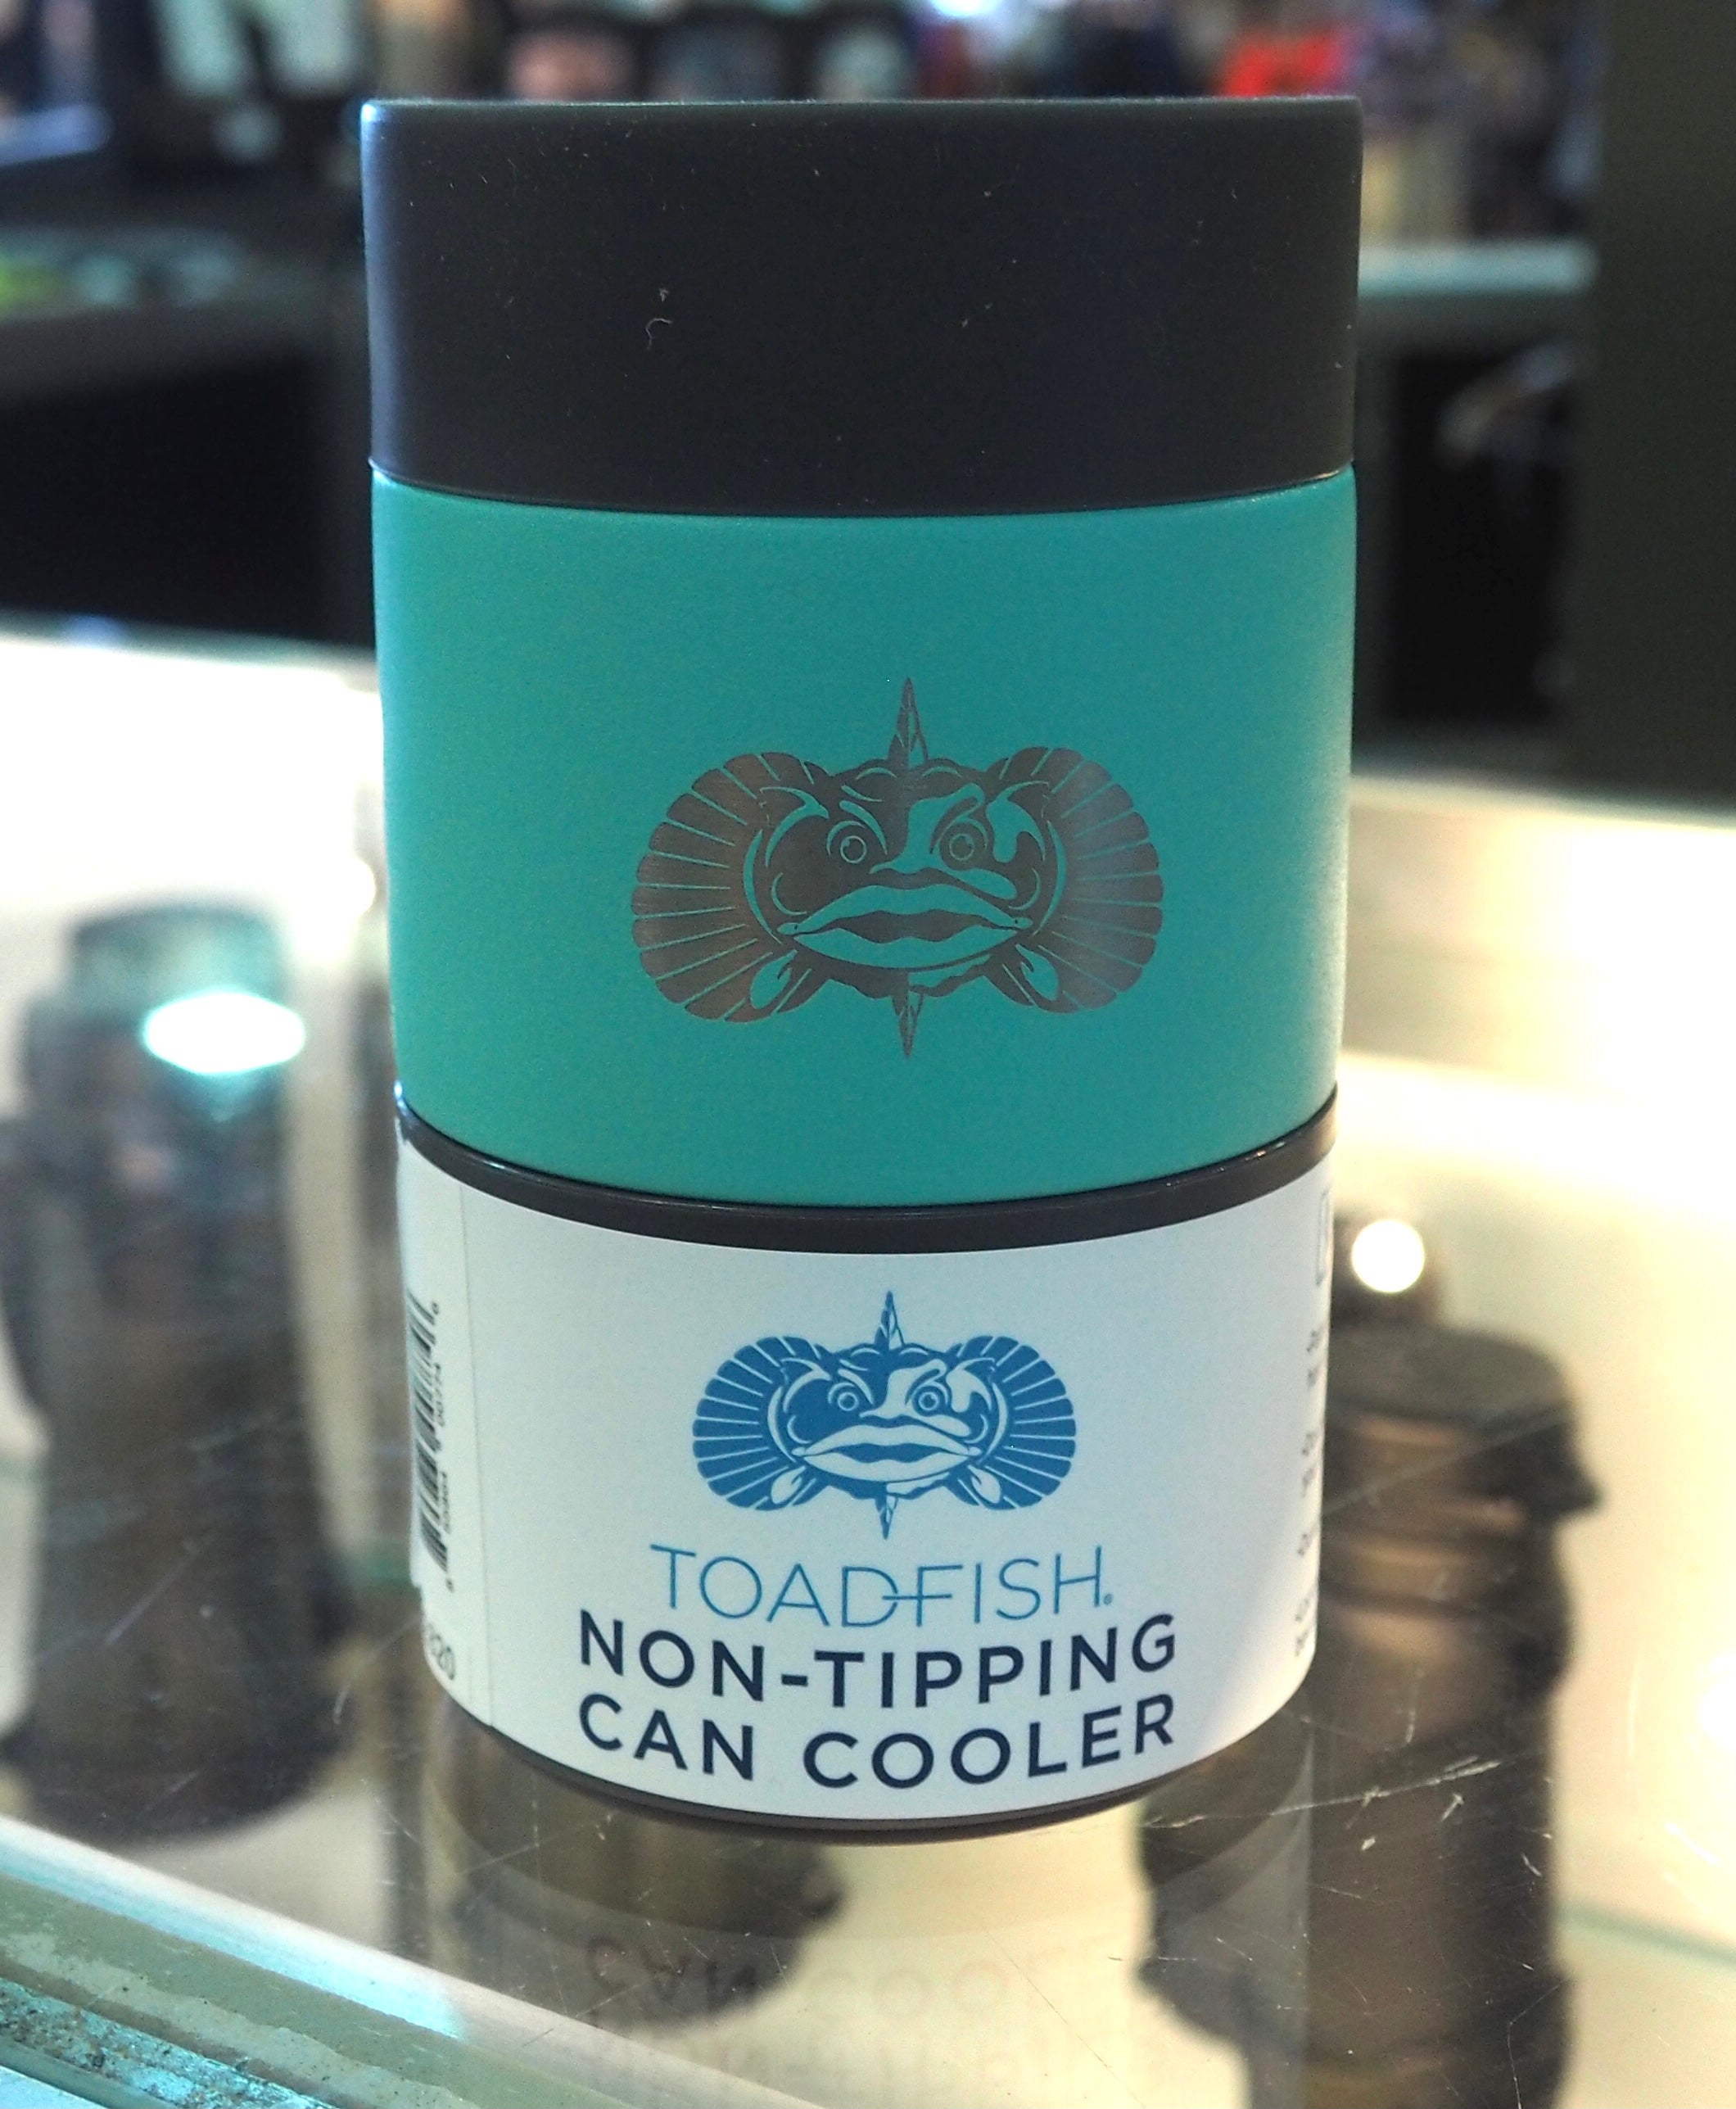  Toadfish Non-Tipping Can Cooler for 12oz Cans